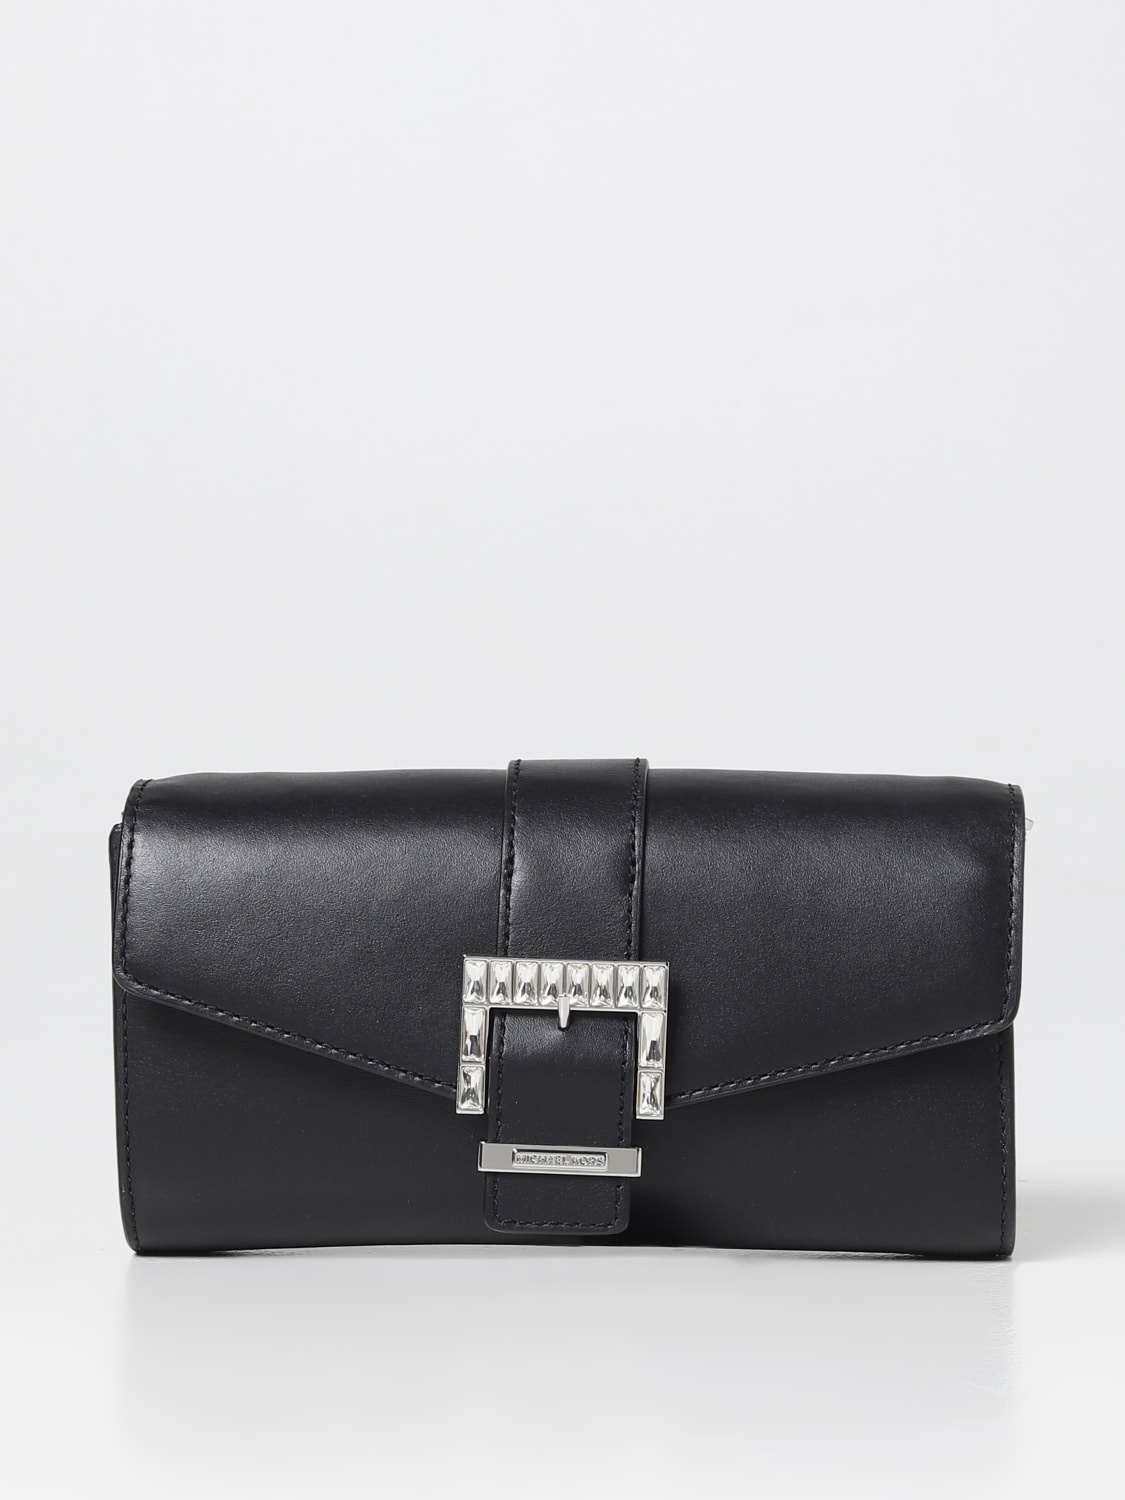 Clutch Bag Michael Kors penelope In Leather